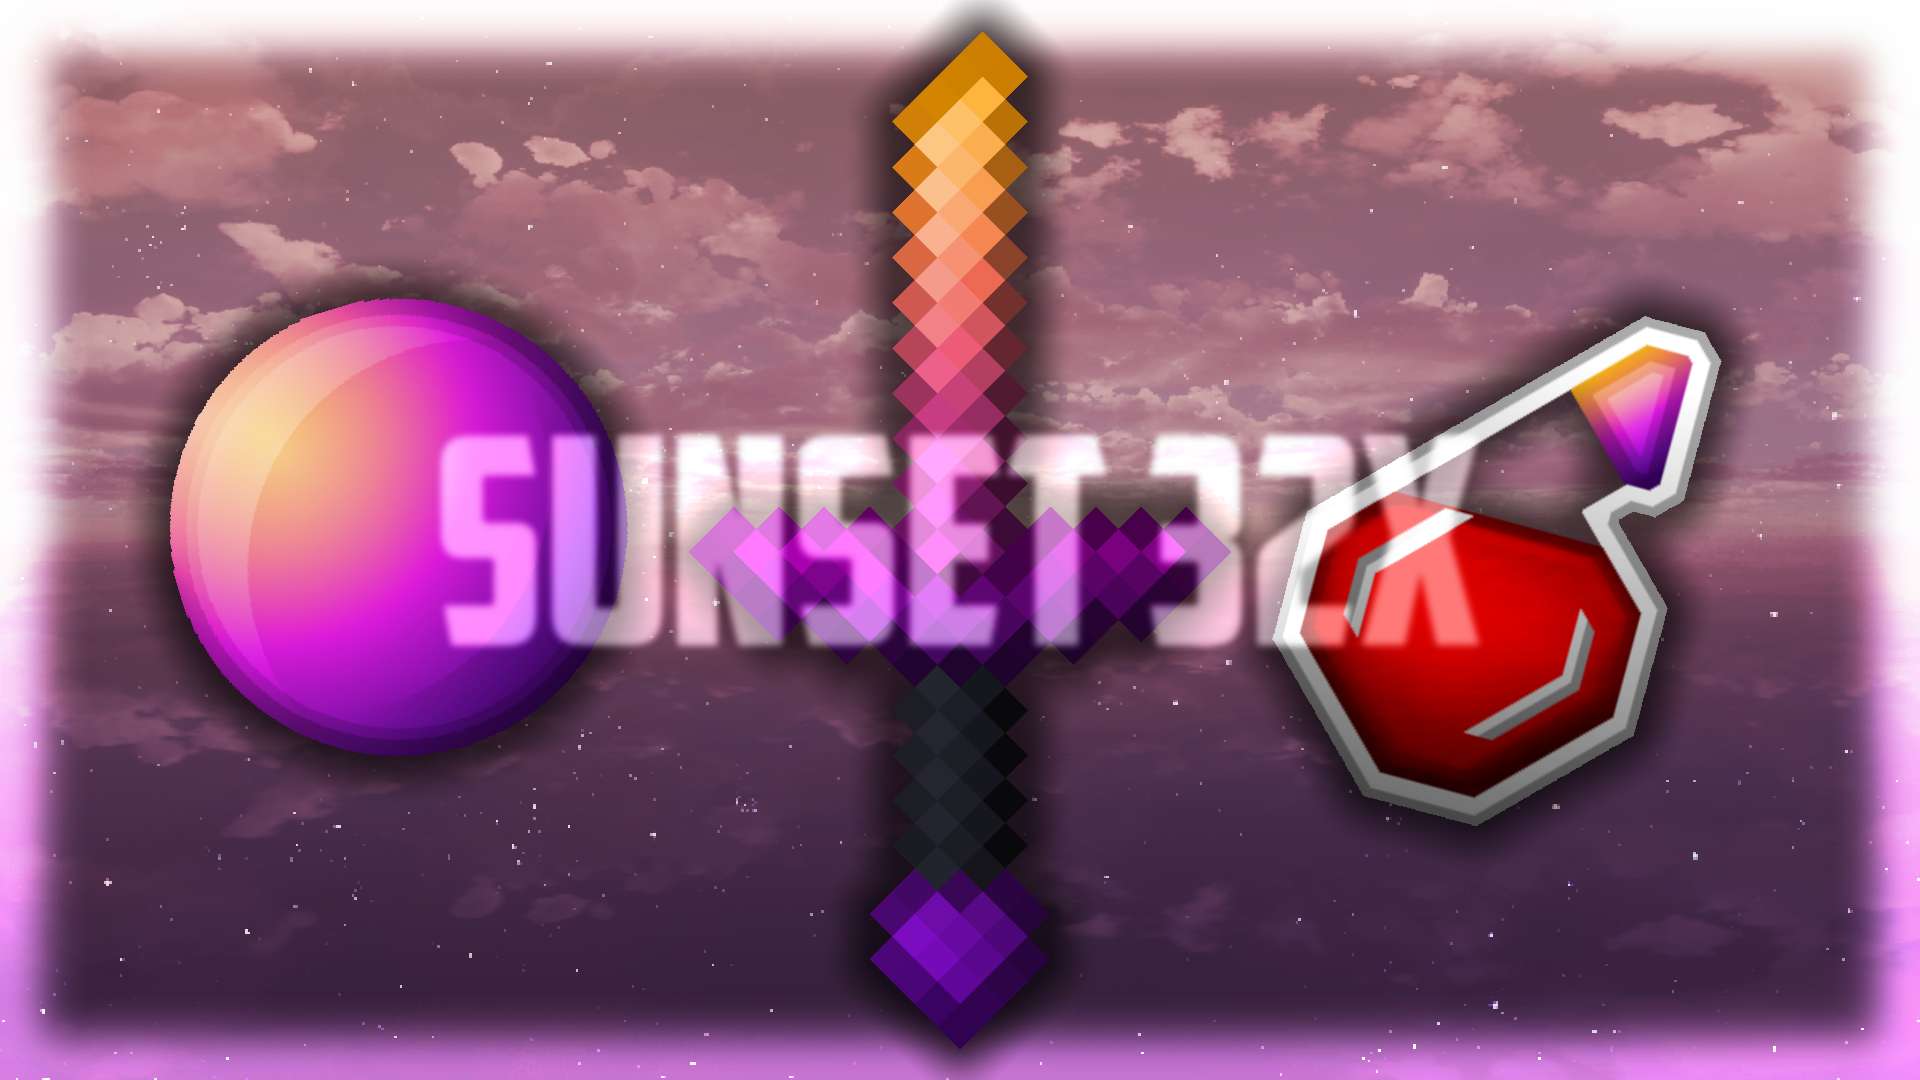 Sunset 32x by Zlax on PvPRP